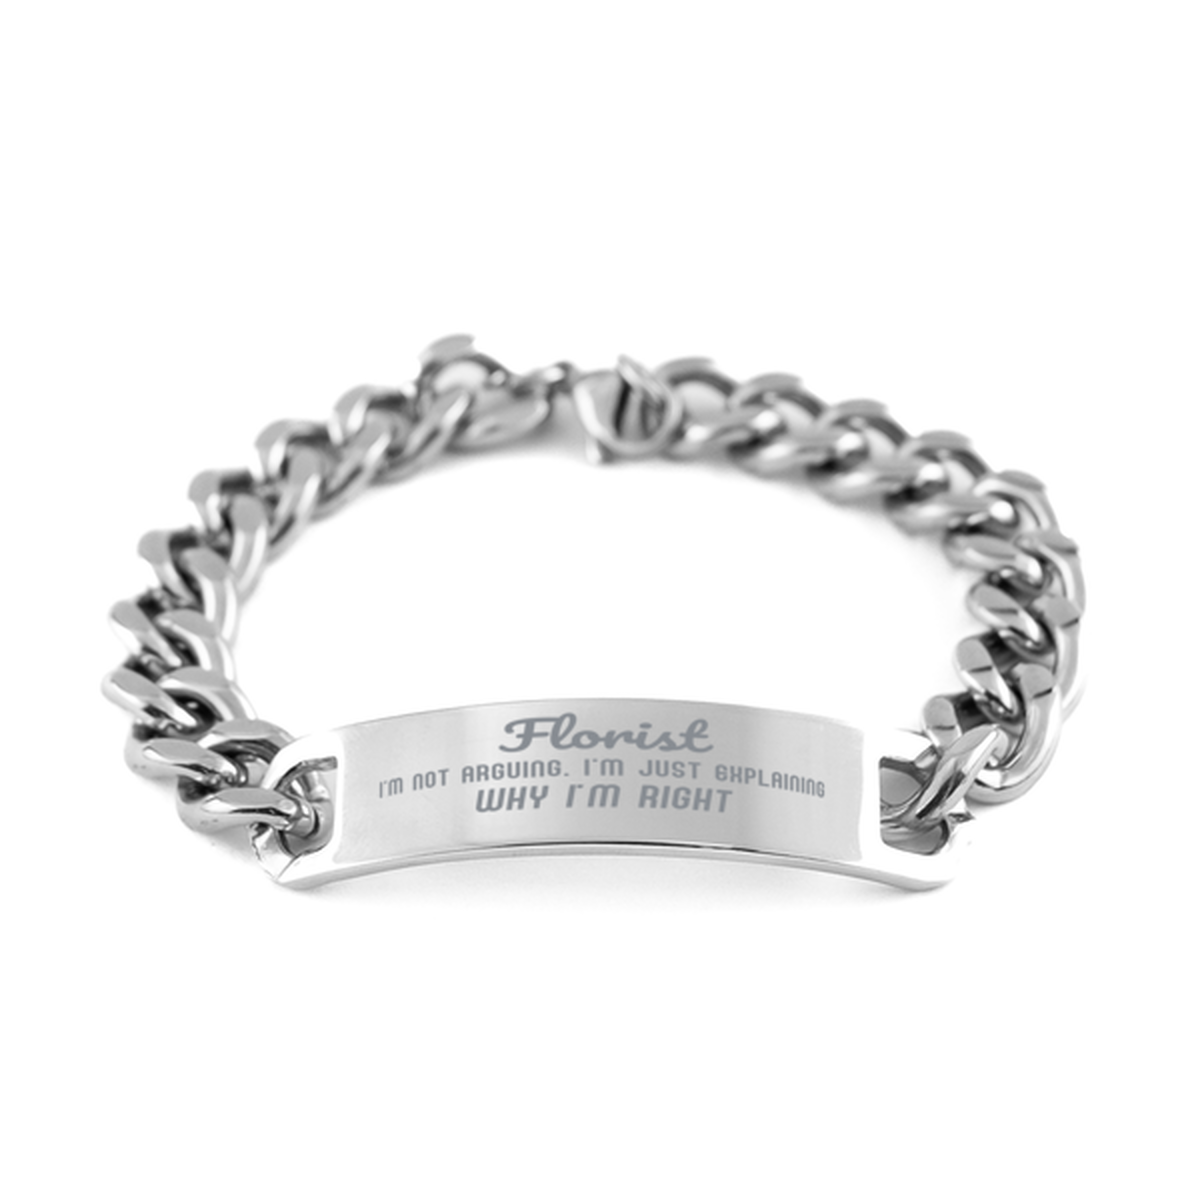 Florist I'm not Arguing. I'm Just Explaining Why I'm RIGHT Cuban Chain Stainless Steel Bracelet, Graduation Birthday Christmas Florist Gifts For Florist Funny Saying Quote Present for Men Women Coworker